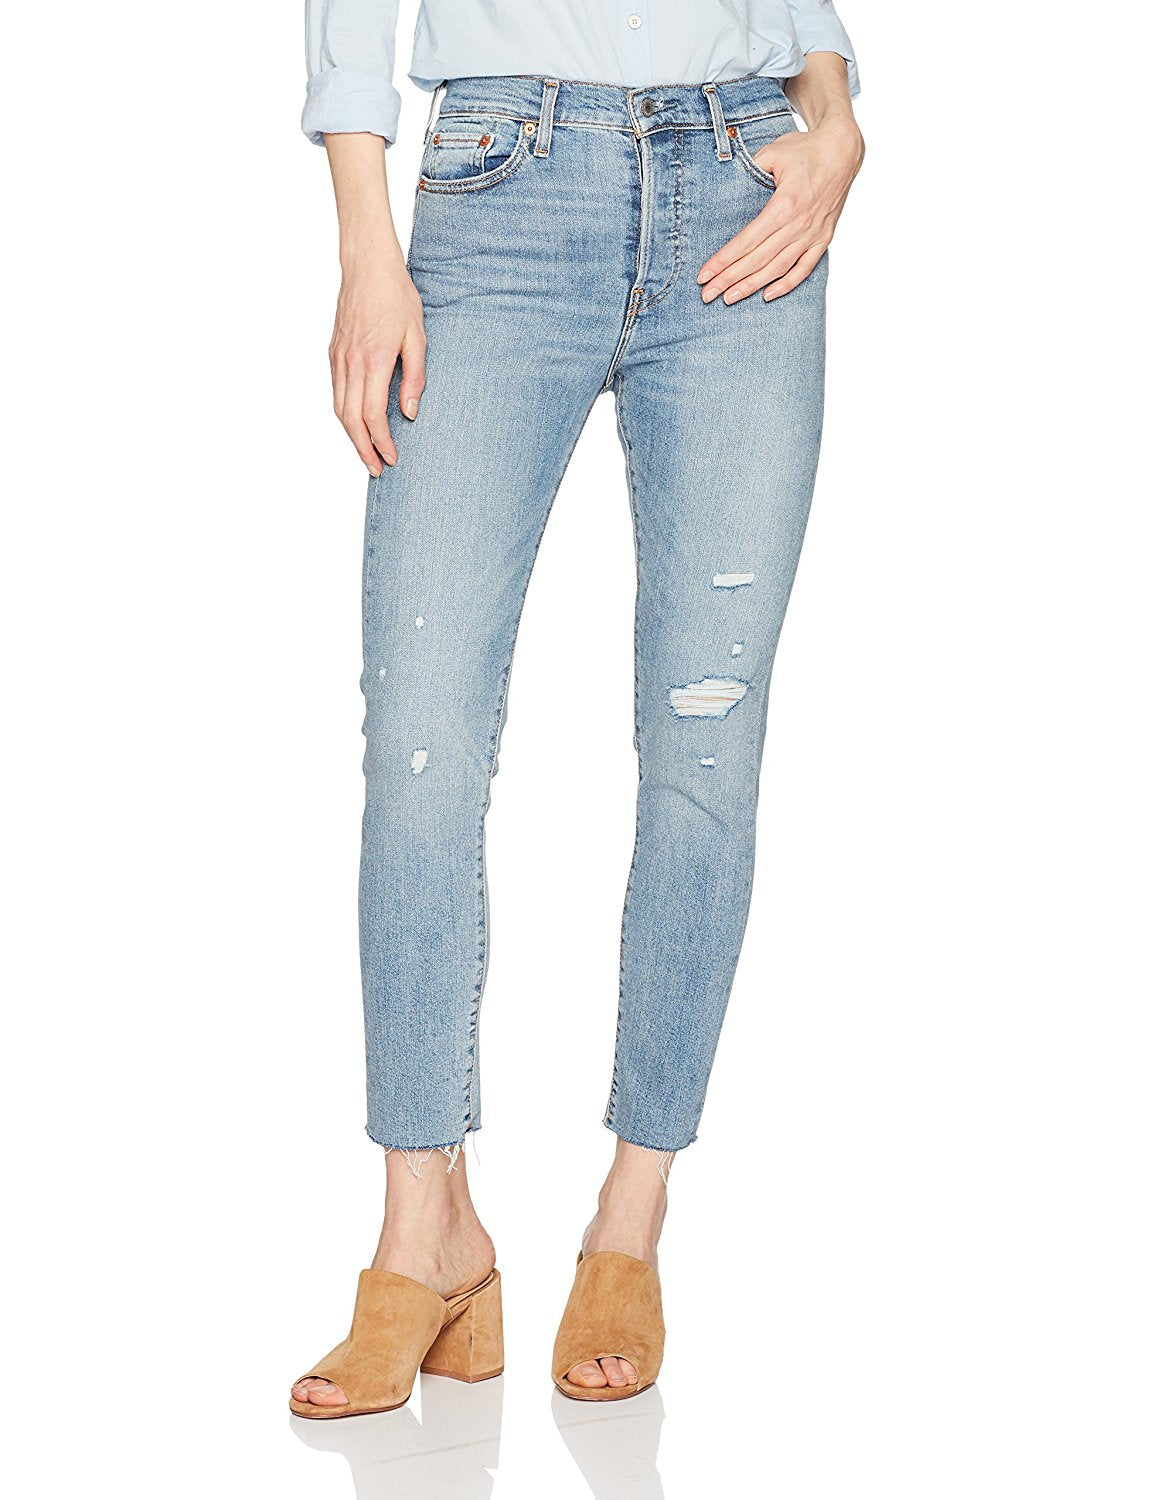 Levi's Women's Wedgie Skinny Jeans – Imax Fashions